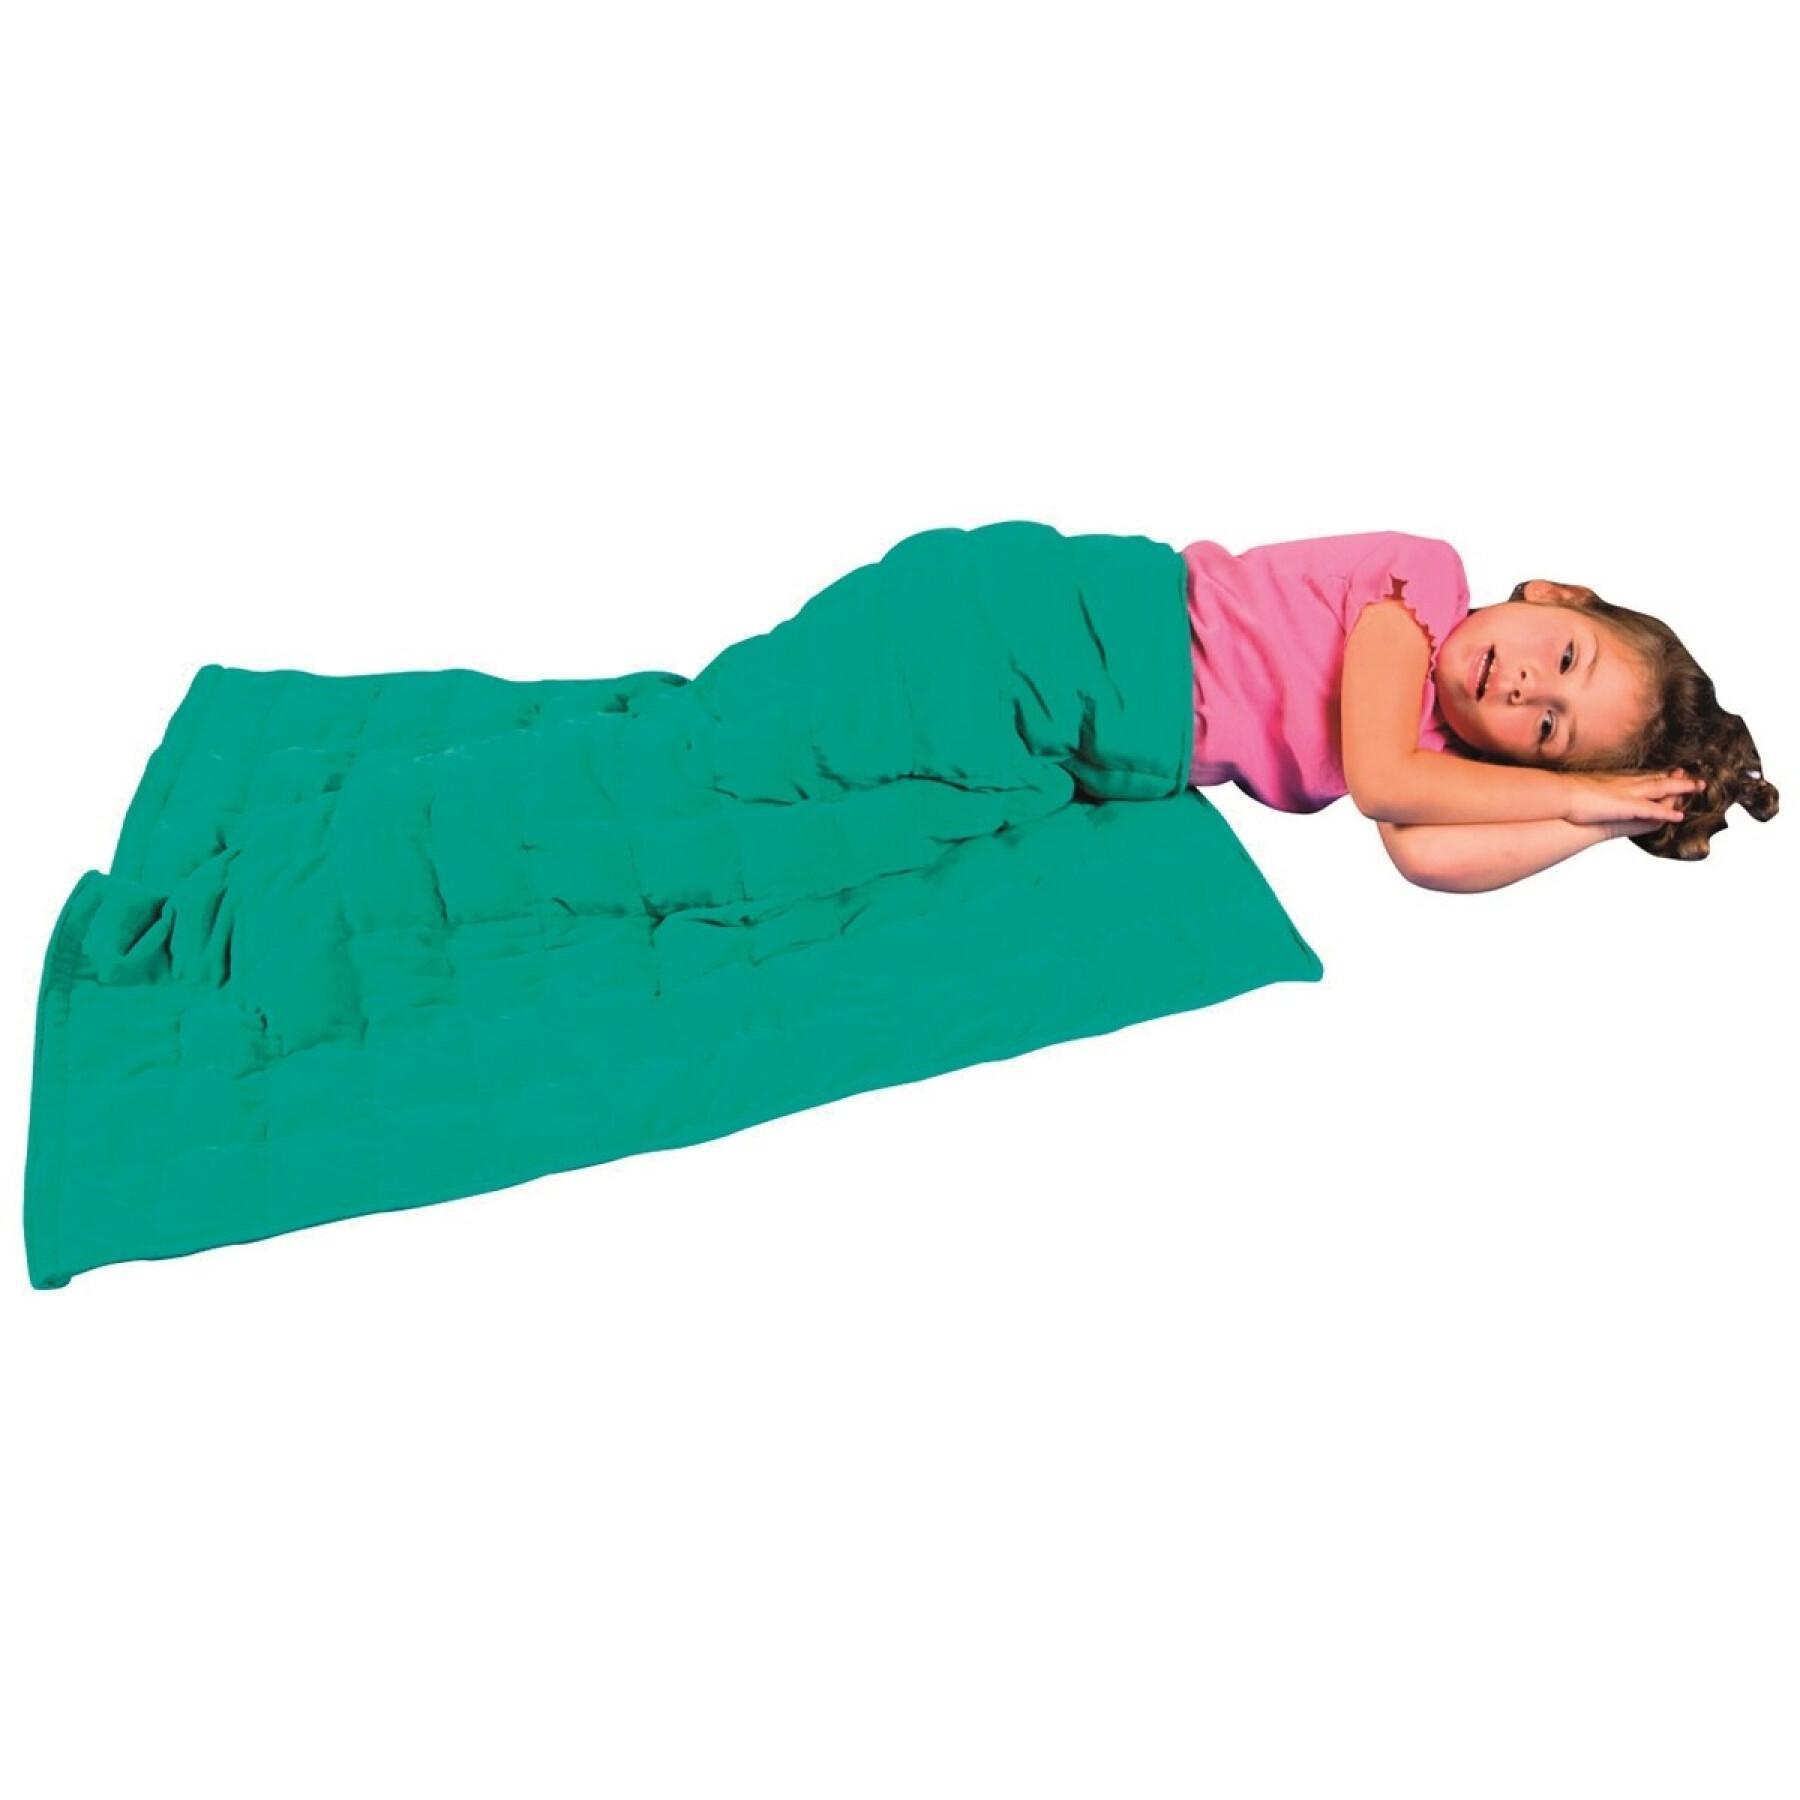 Children's weighted Blanket Stimove Lay-On-Me